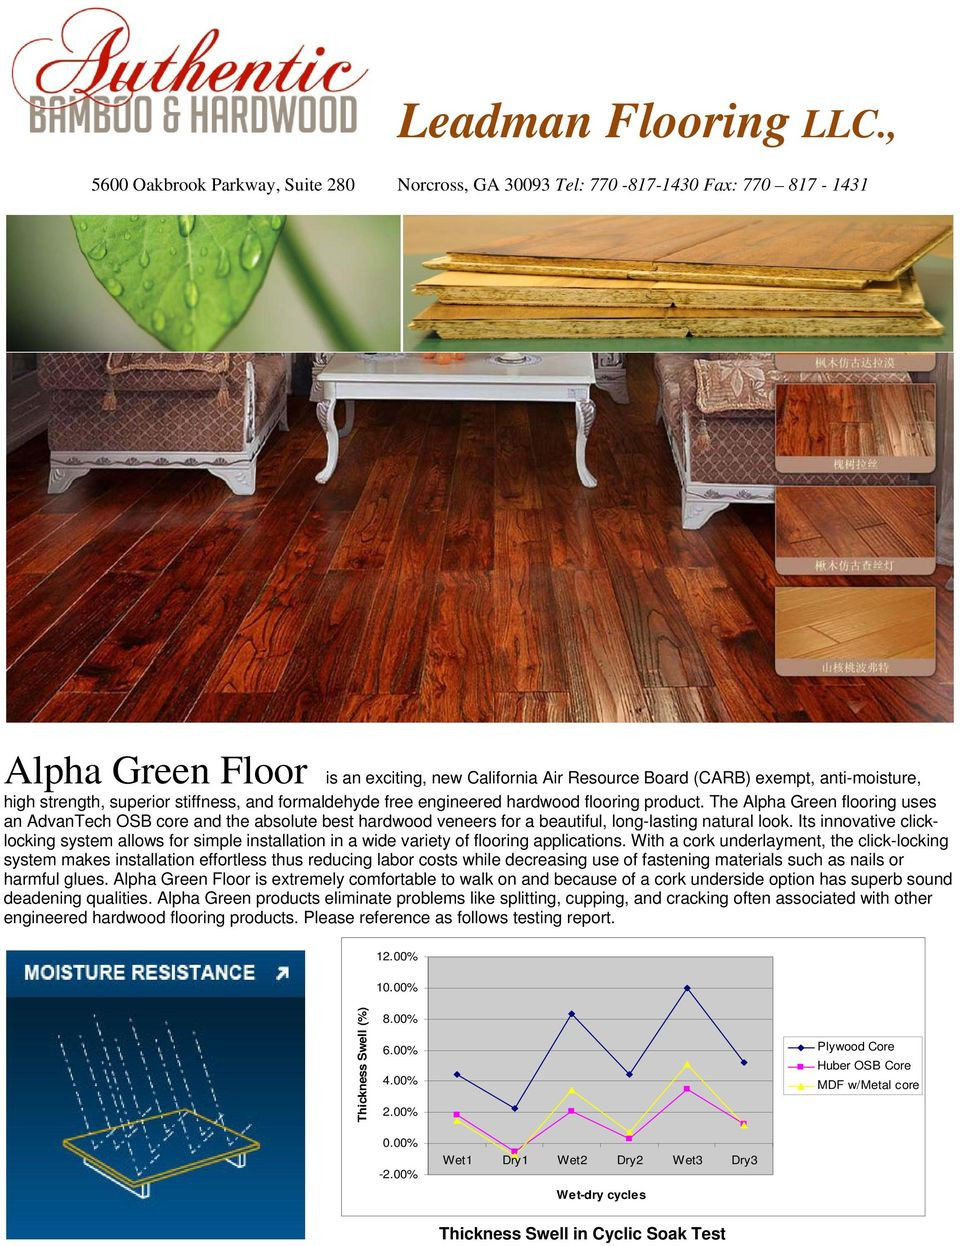 how to install engineered hardwood flooring over concrete of leadman flooring llc pdf for strength superior stiffness and formaldehyde free engineered hardwood flooring product